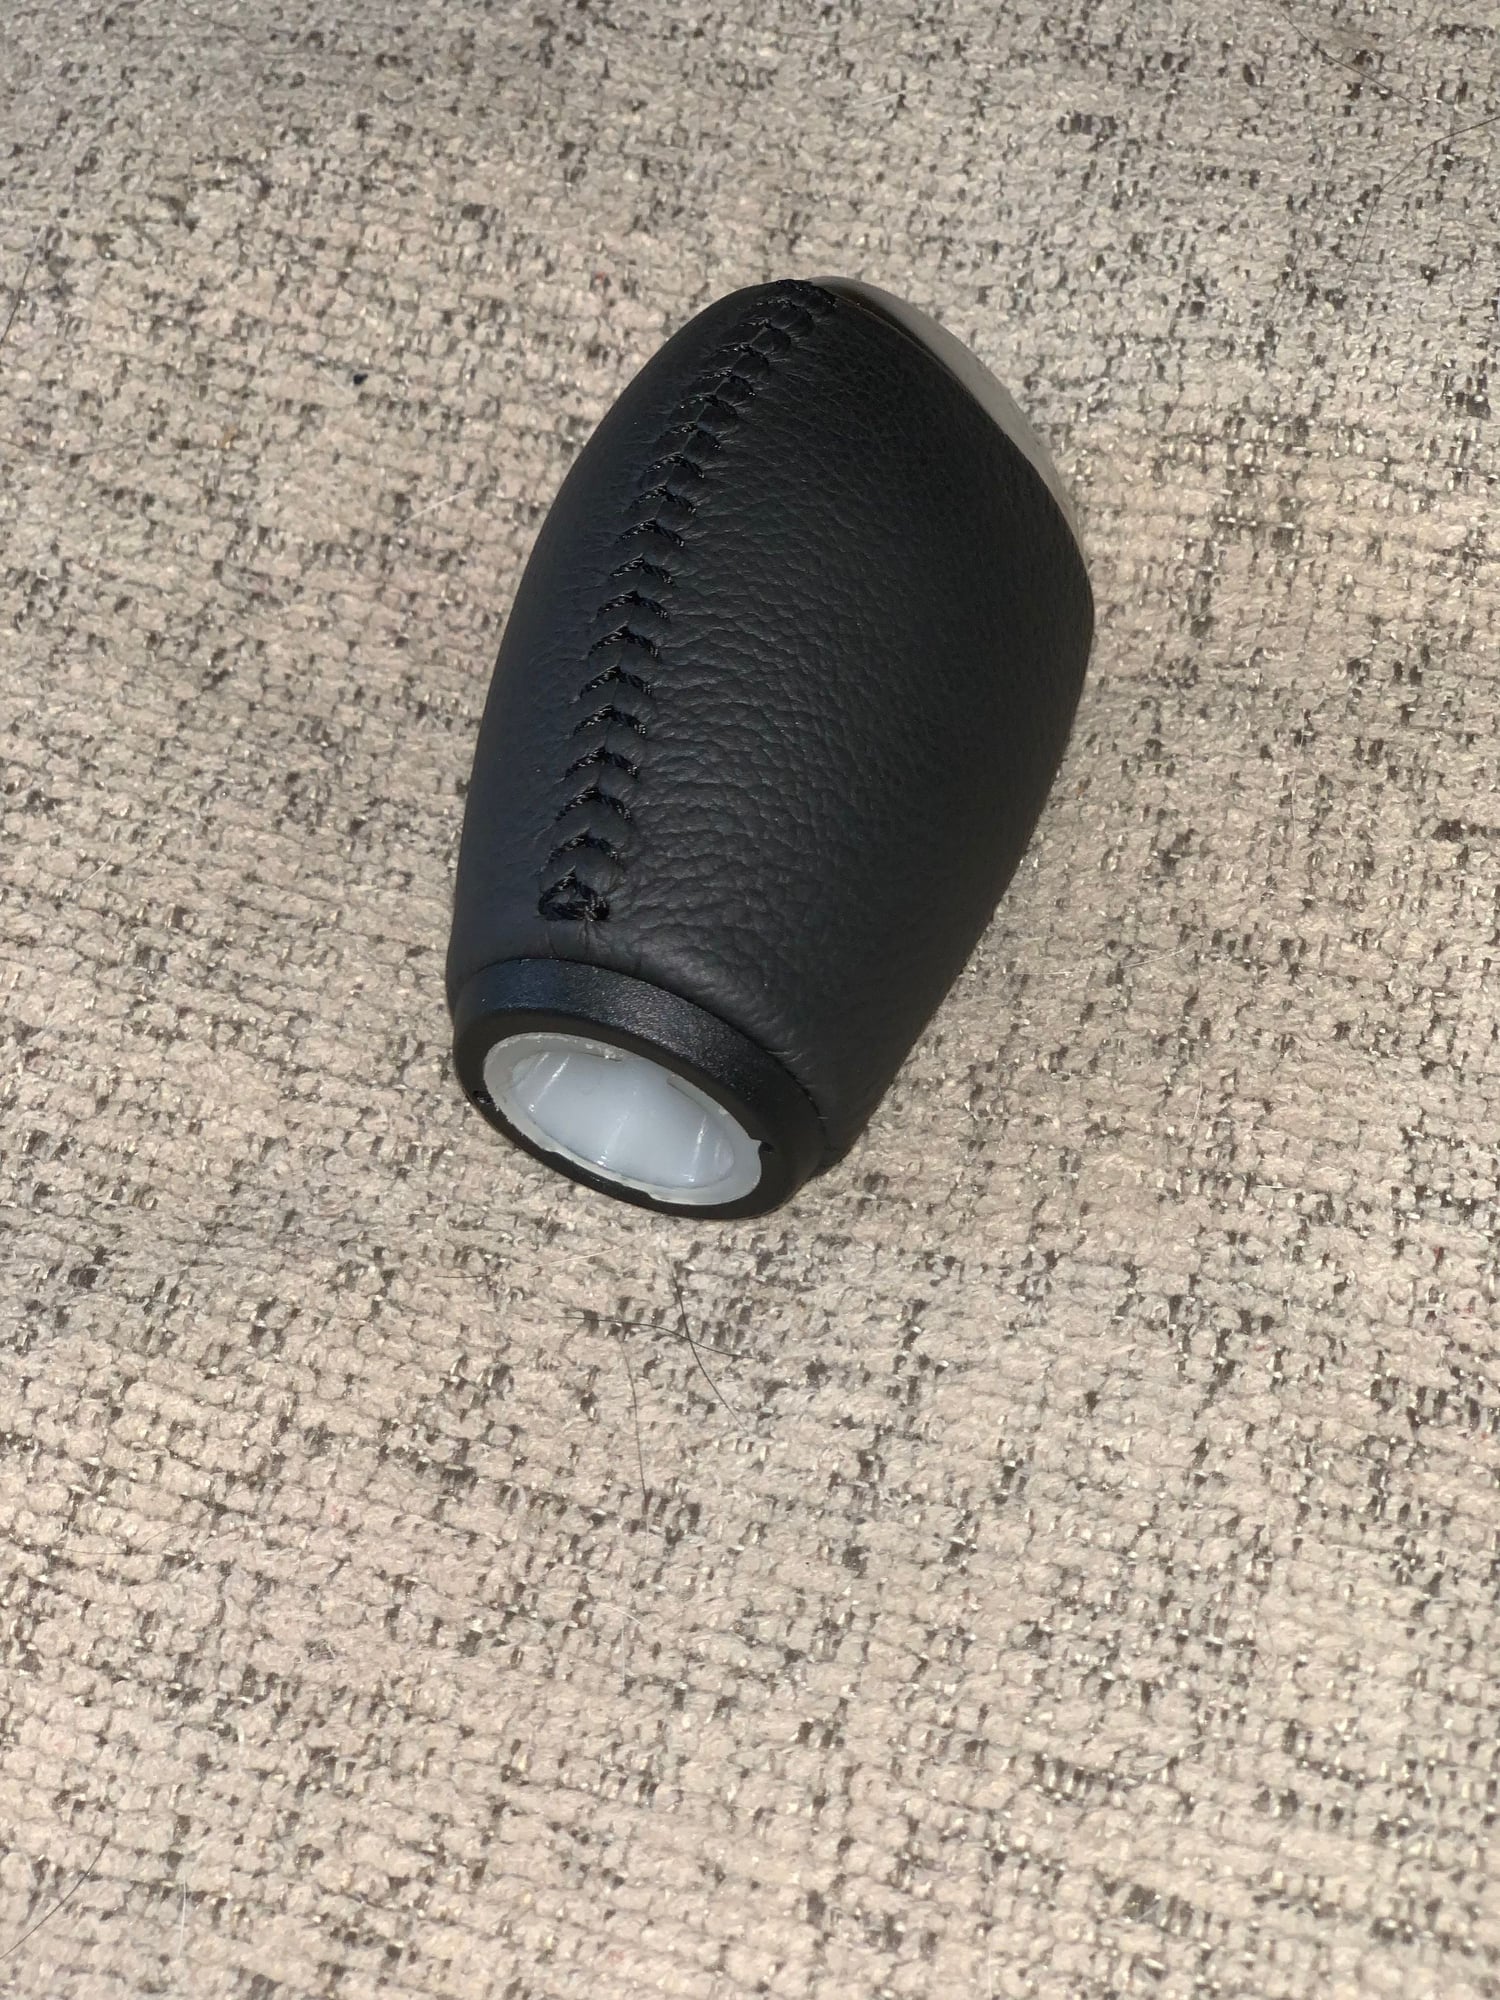 Interior/Upholstery - RX-8 5 Speed Shift Knob - Used - 1993 to 2002 Mazda RX-7 - Portland, OR 97035, United States